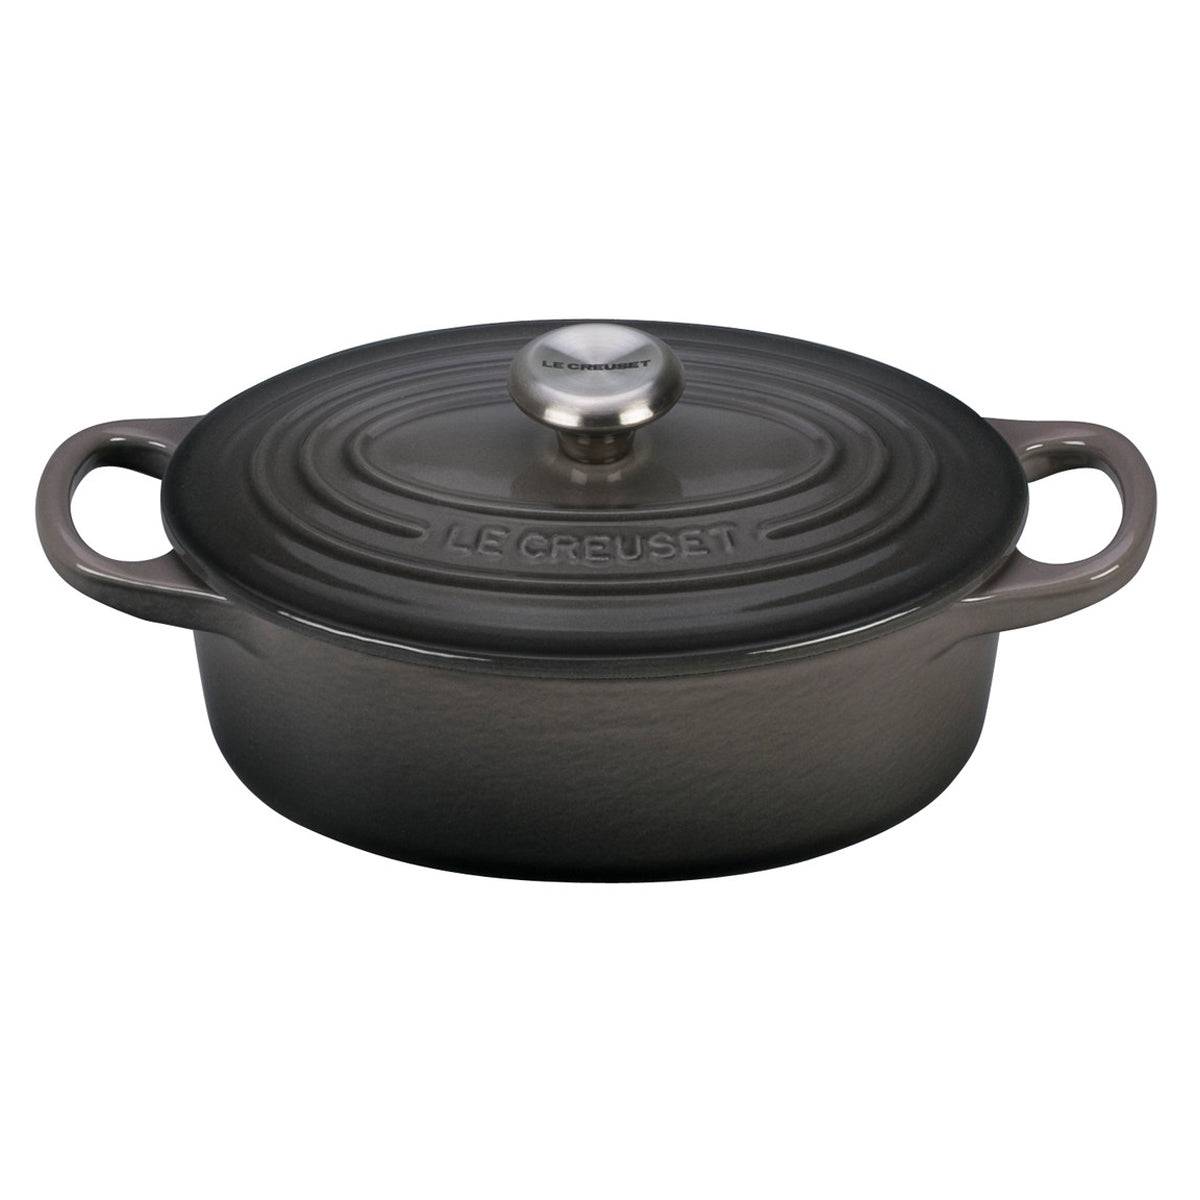 Le Creuset Signature Enameled Cast Iron Oval French / Dutch Oven, 9.5-Quart, Oyster - Kitchen Universe